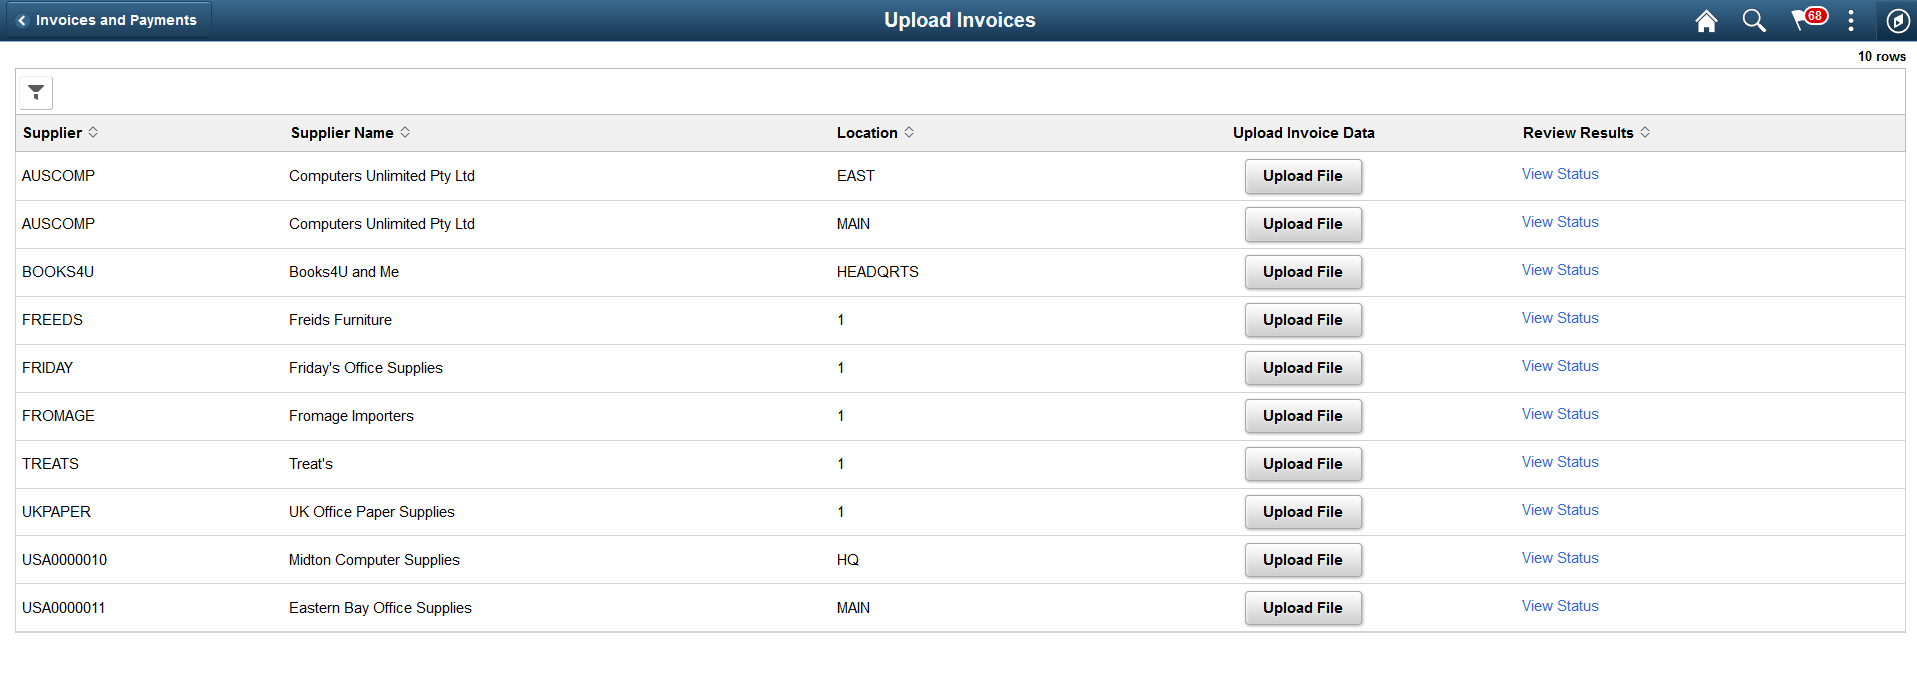 Upload Invoices page